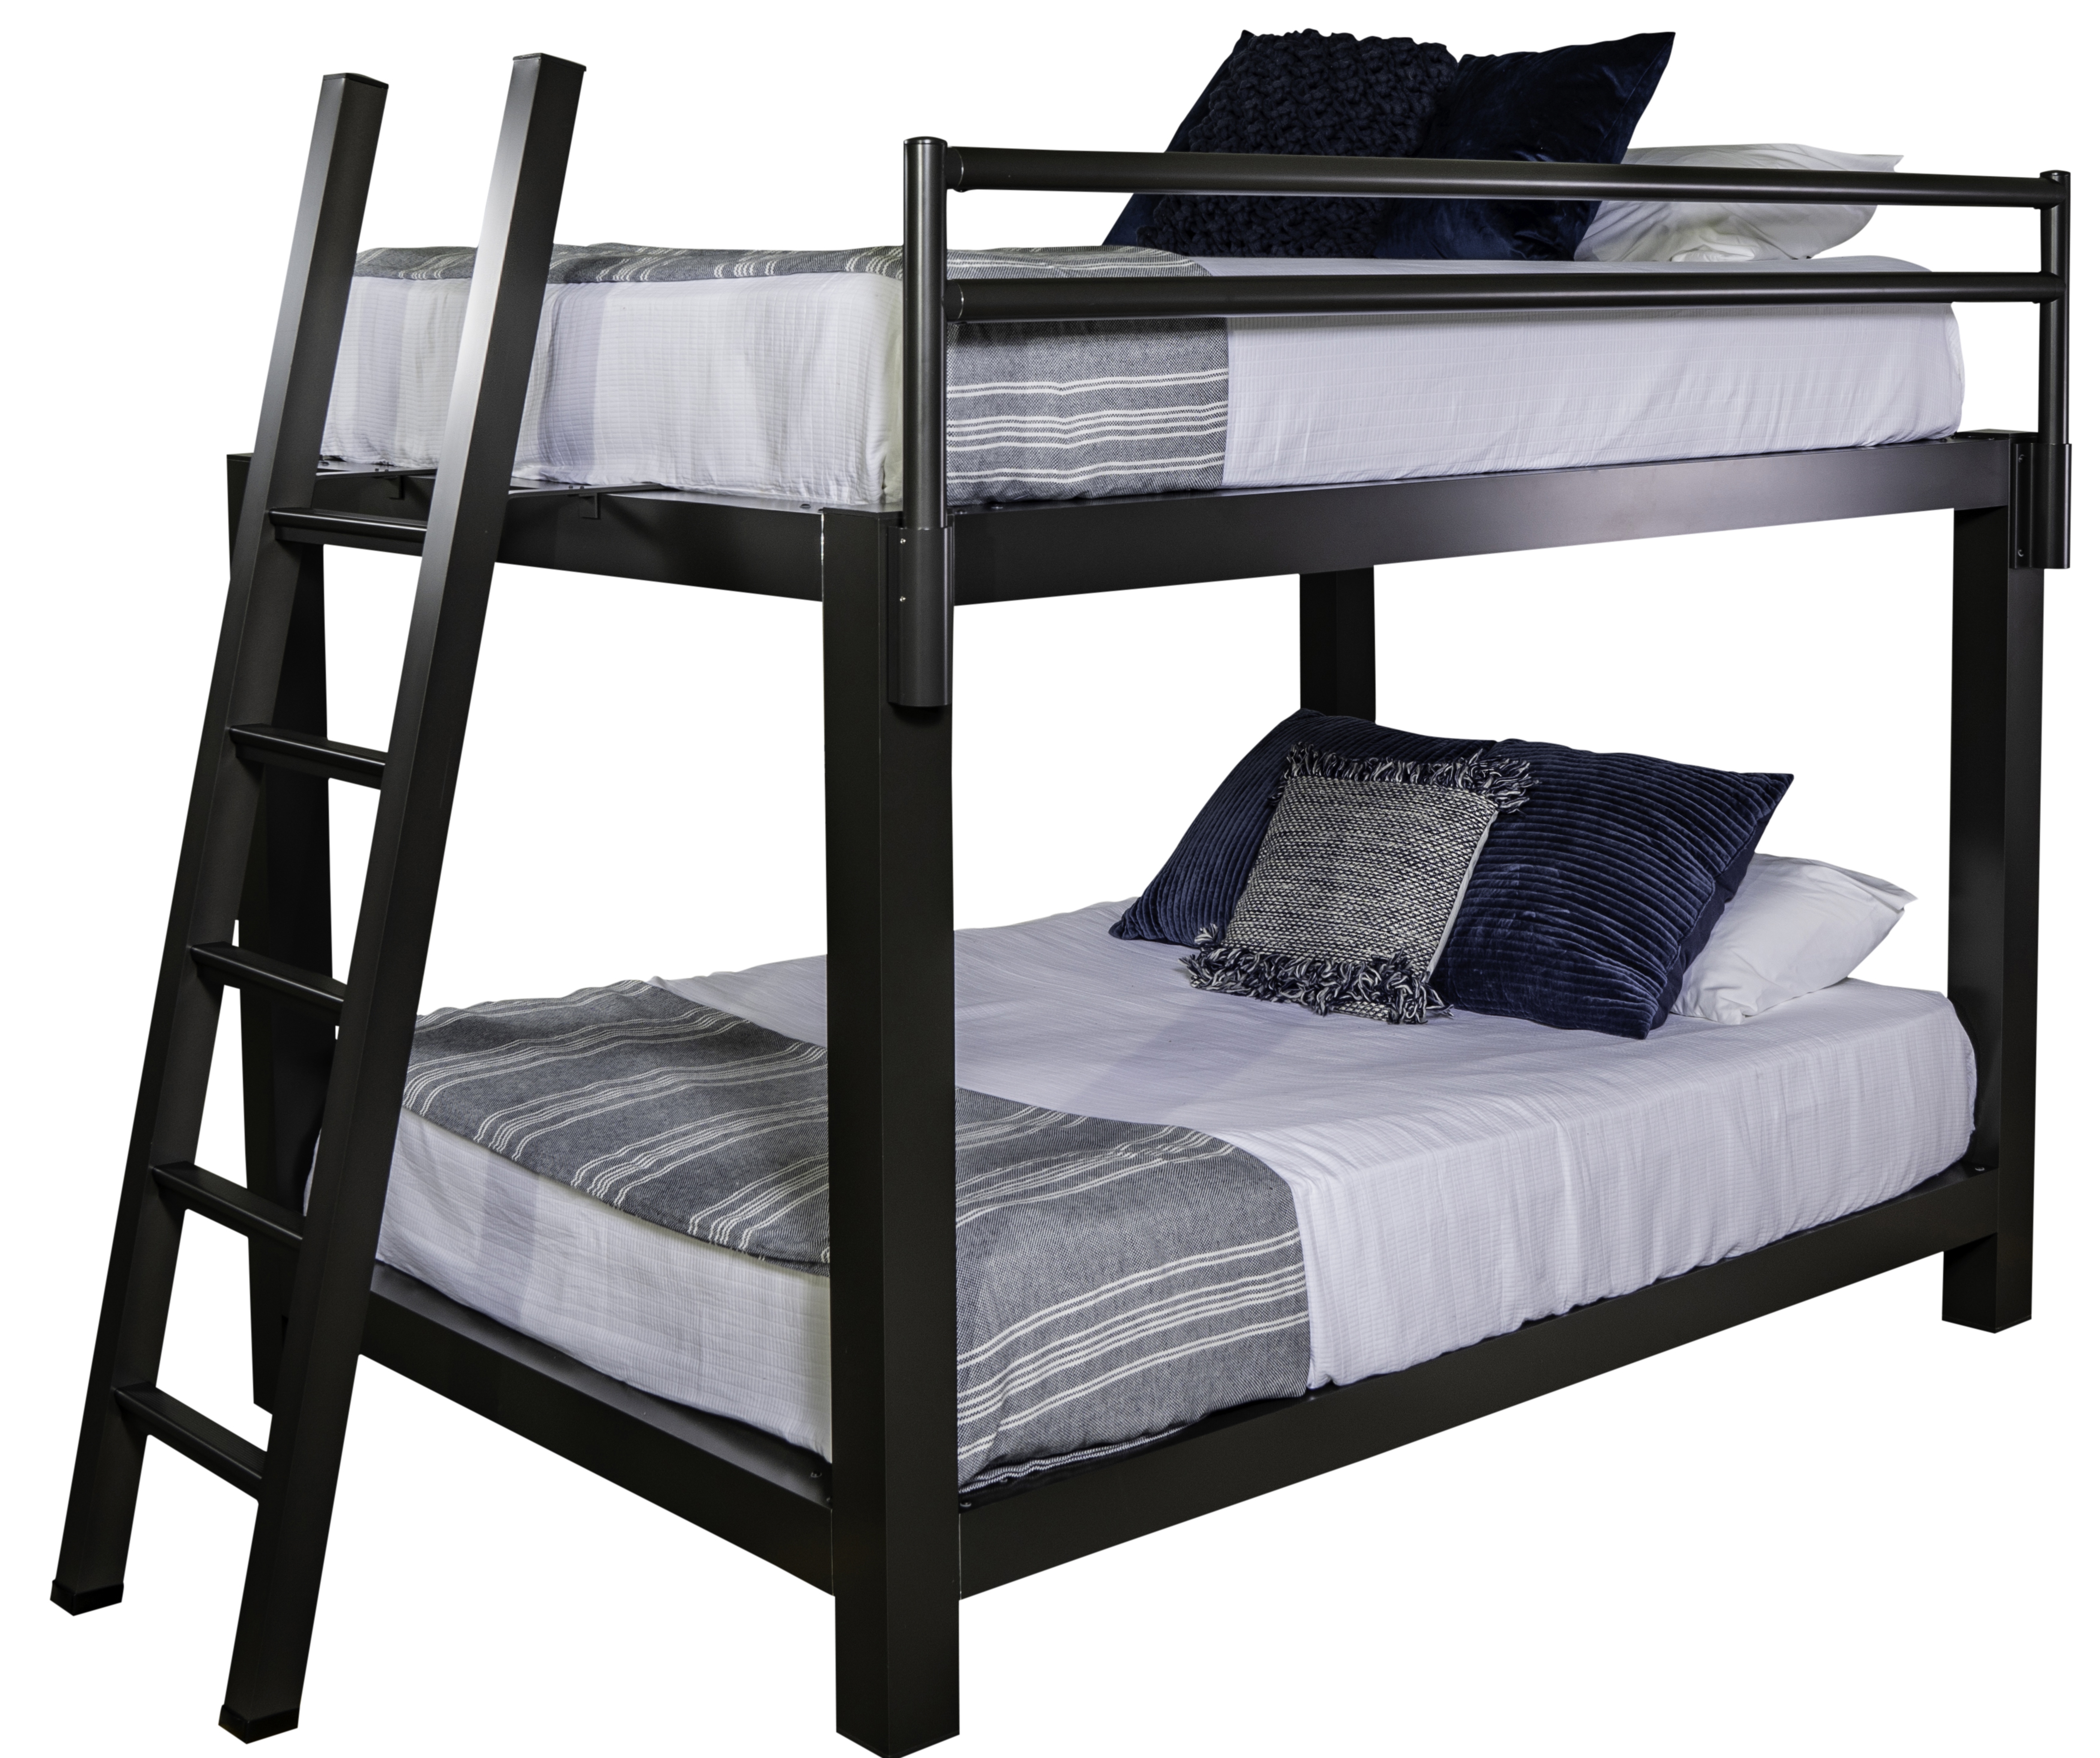 Bunk Beds, Ryan Twin Over Full Stair Bunk Bed Instructions